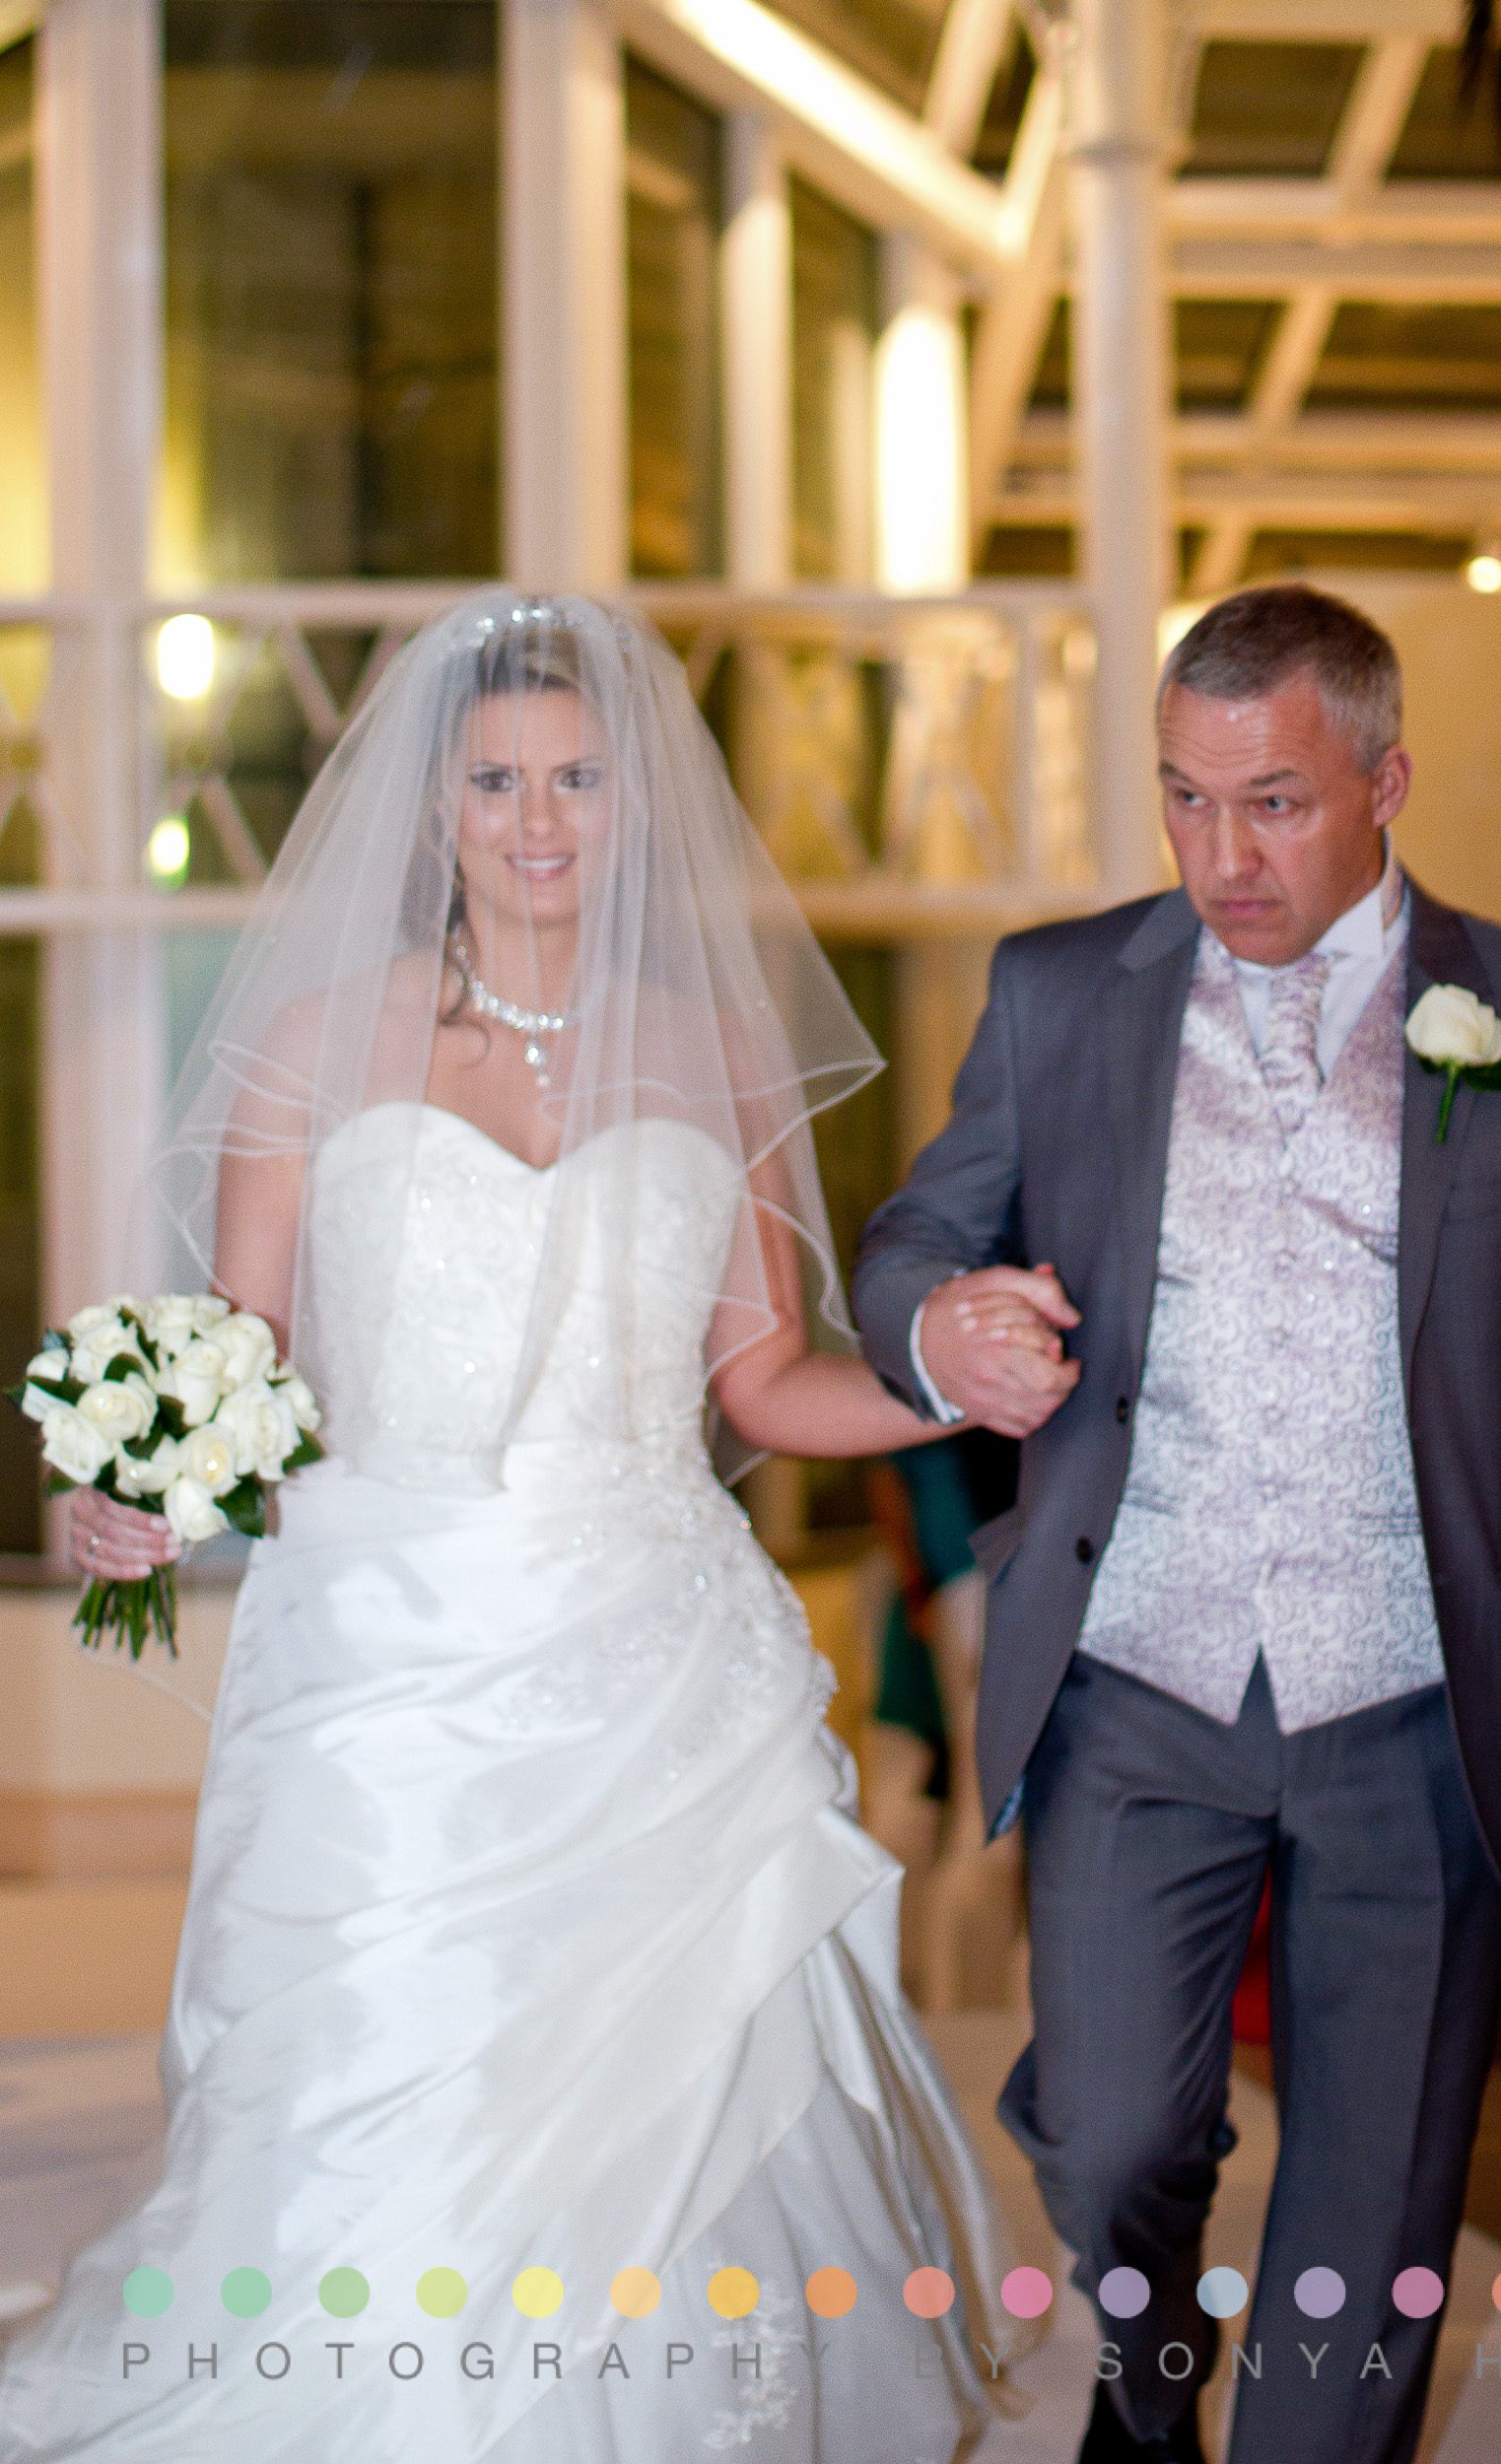 walking to the ceremony bright conservatory western bride a in central London millennium Gloucester hotel wedding